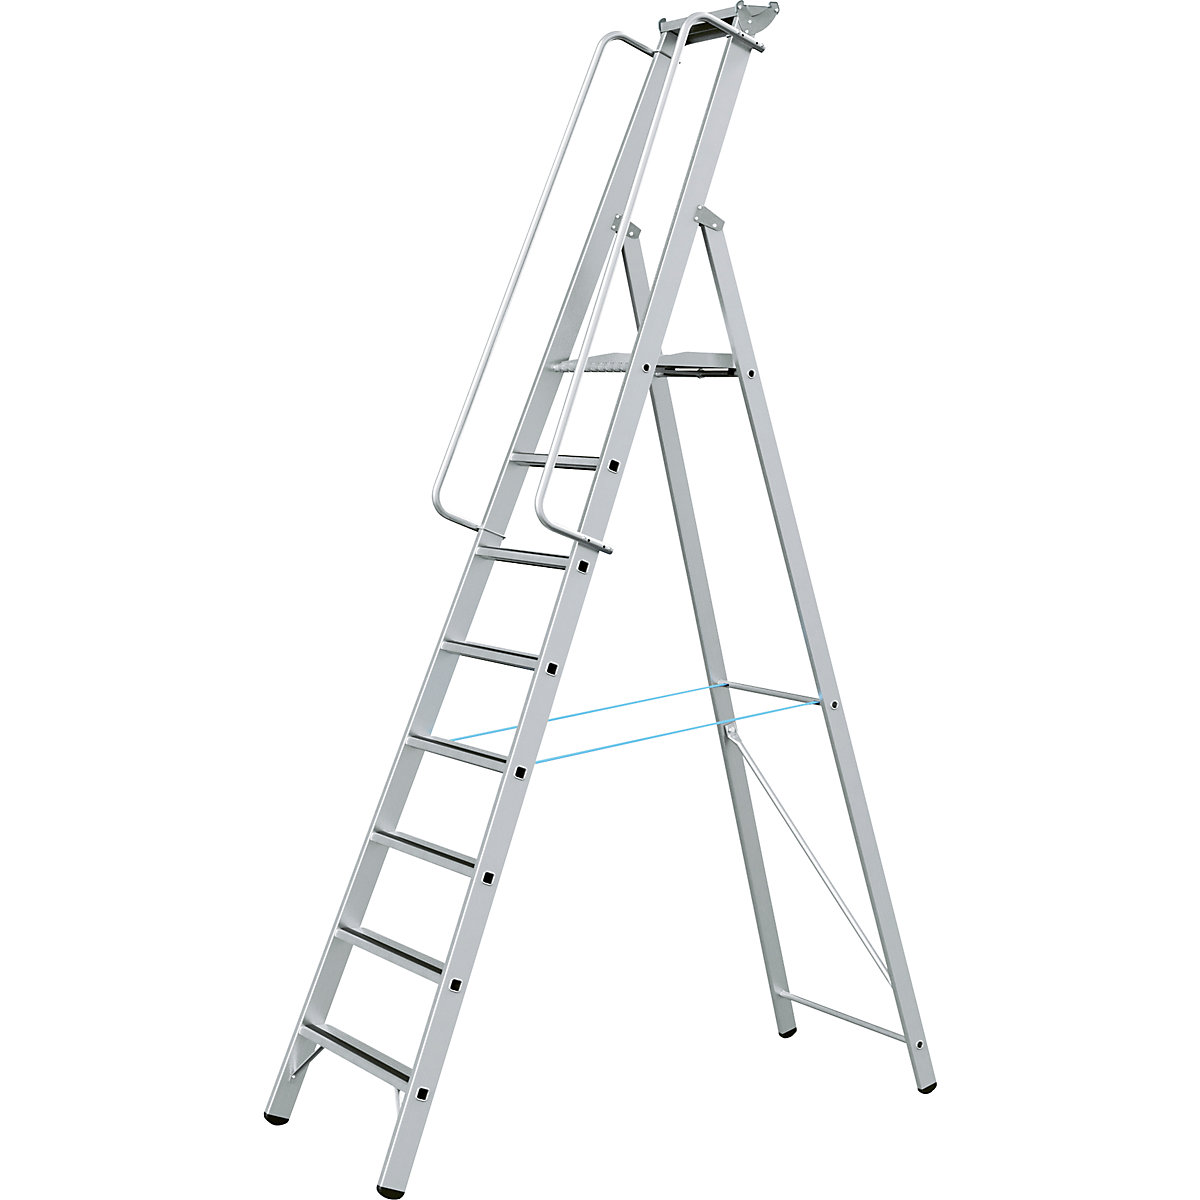 Aluminium step ladder with large platform – ZARGES, with hand rail on both sides, for self-assembly, 8 steps-6